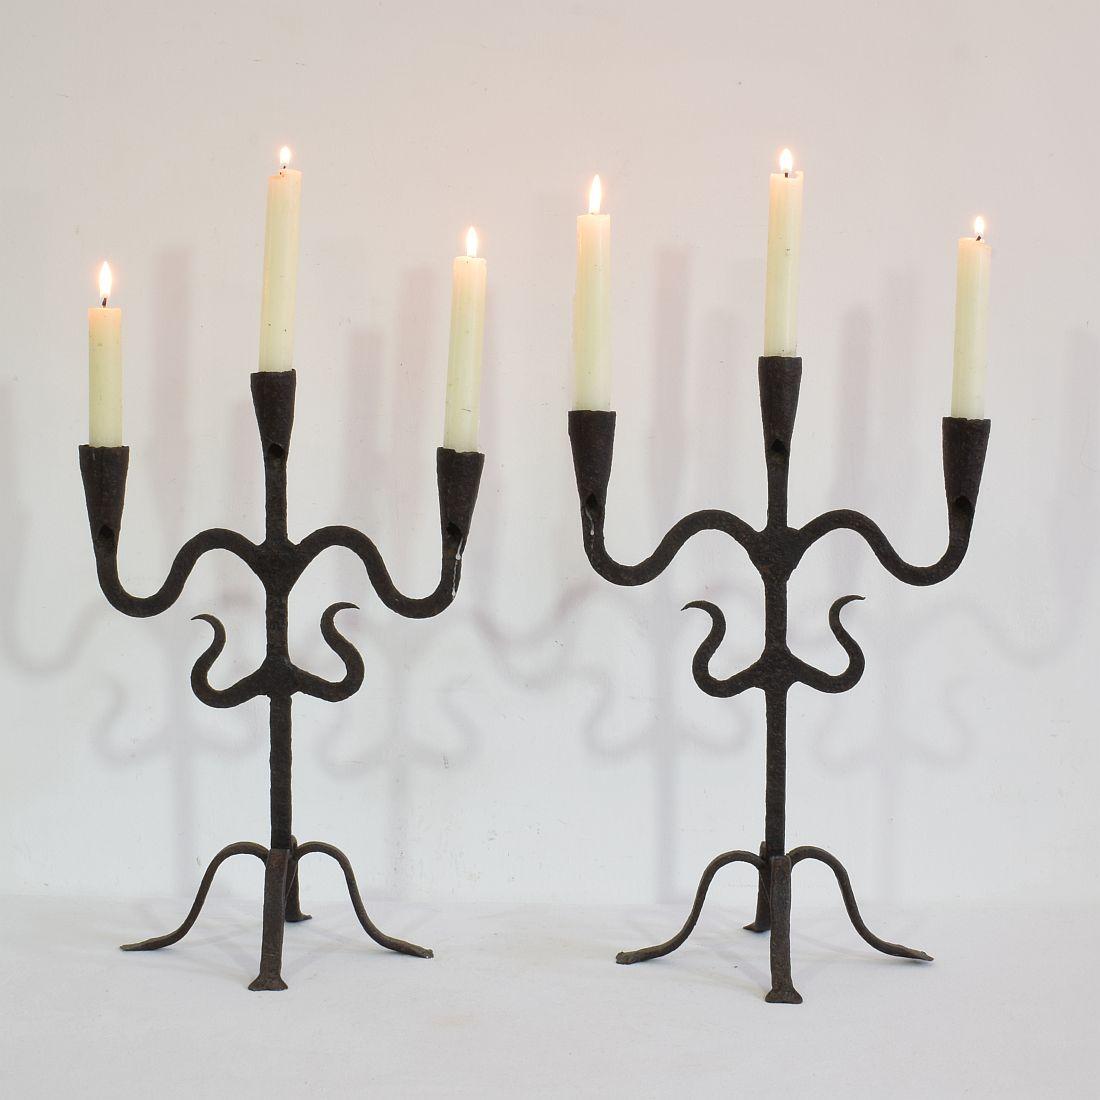 Beautiful pair of 18th-19th century hand forged iron candleholders, Southern France, Spain, circa 1750-1850. Weathered.
more photo's available on request.
Measures: H:36-38cm, W:25-26cm, D:19,5cm.